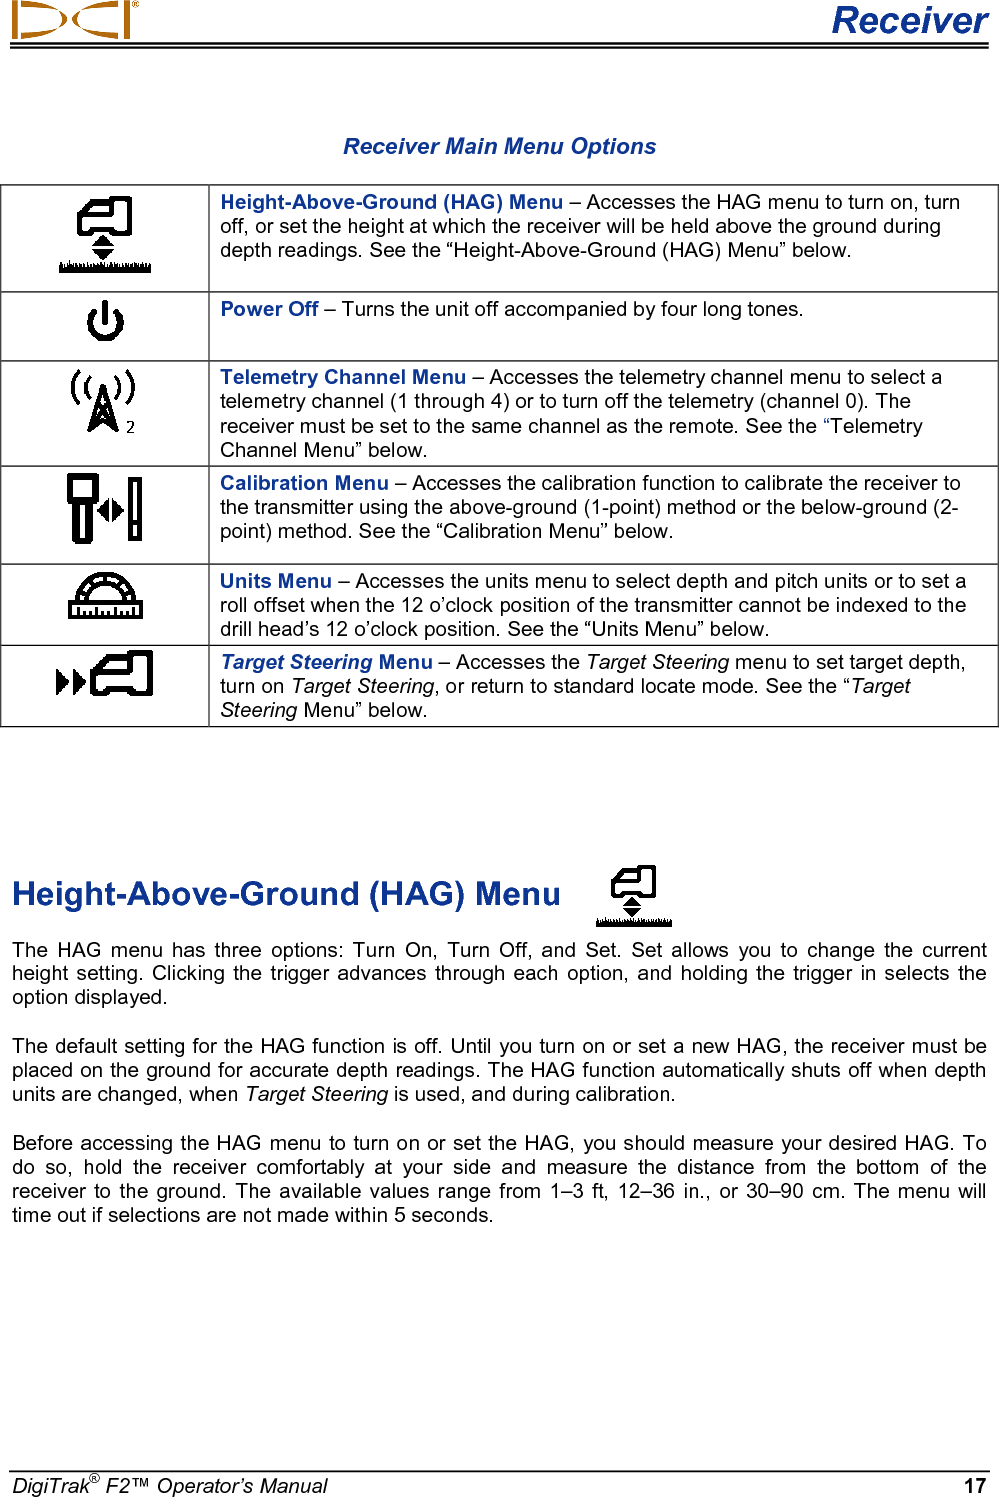  Receiver DigiTrak® F2™ Operator’s Manual 17 Receiver Main Menu Options  Height-Above-Ground (HAG) Menu – Accesses the HAG menu to turn on, turn off, or set the height at which the receiver will be held above the ground during depth readings. See the “Height-Above-Ground (HAG) Menu” below.  Power Off – Turns the unit off accompanied by four long tones.   Telemetry Channel Menu – Accesses the telemetry channel menu to select a telemetry channel (1 through 4) or to turn off the telemetry (channel 0). The receiver must be set to the same channel as the remote. See the “Telemetry Channel Menu” below.  Calibration Menu – Accesses the calibration function to calibrate the receiver to the transmitter using the above-ground (1-point) method or the below-ground (2-point) method. See the “Calibration Menu” below.  Units Menu – Accesses the units menu to select depth and pitch units or to set a roll offset when the 12 o’clock position of the transmitter cannot be indexed to the drill head’s 12 o’clock position. See the “Units Menu” below.  Target Steering Menu – Accesses the Target Steering menu to set target depth, turn on Target Steering, or return to standard locate mode. See the “Target Steering Menu” below.    Height-Above-Ground (HAG) Menu The HAG menu has three options: Turn  On, Turn Off, and Set.  Set allows you to change the current height setting.  Clicking the trigger advances through each option, and  holding the trigger in  selects the option displayed.  The default setting for the HAG function is off. Until you turn on or set a new HAG, the receiver must be placed on the ground for accurate depth readings. The HAG function automatically shuts off when depth units are changed, when Target Steering is used, and during calibration. Before accessing the HAG menu to turn on or set the HAG, you should measure your desired HAG. To do so, hold the receiver comfortably at your side and measure the distance from the bottom of the receiver to the ground. The available values range from 1–3 ft, 12–36 in., or 30–90 cm. The menu will time out if selections are not made within 5 seconds. 